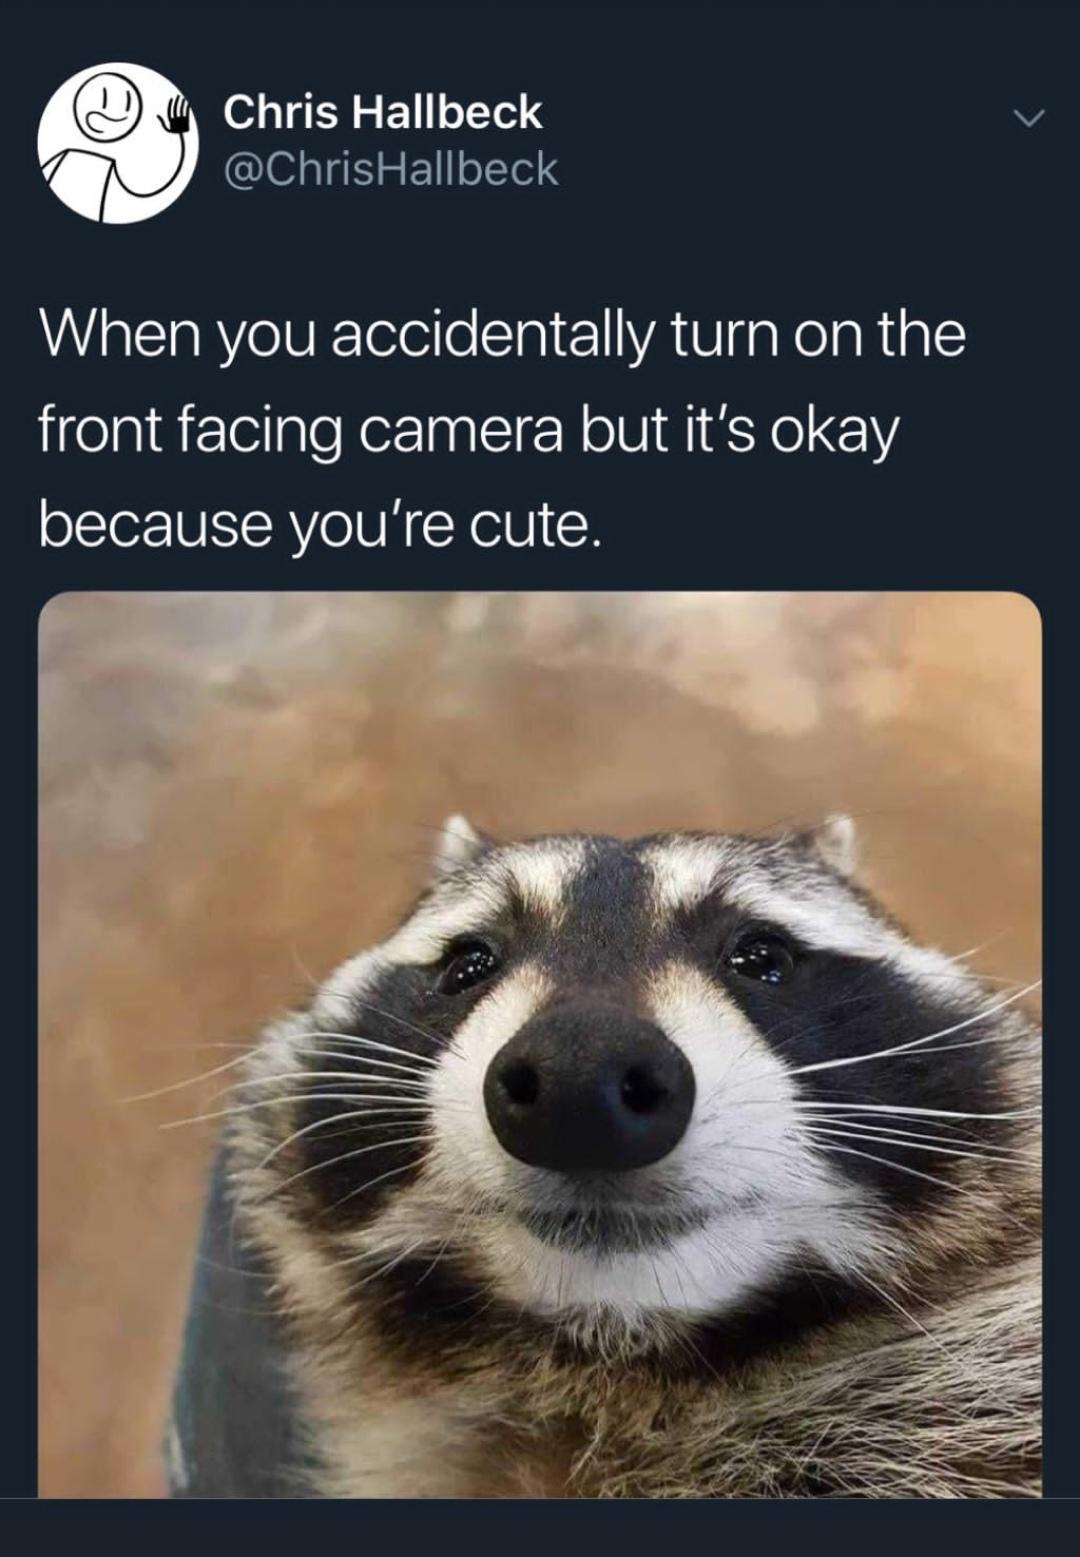 chaser raccoon - Chris Hallbeck Hallbeck When you accidentally turn on the front facing camera but it's okay because you're cute.